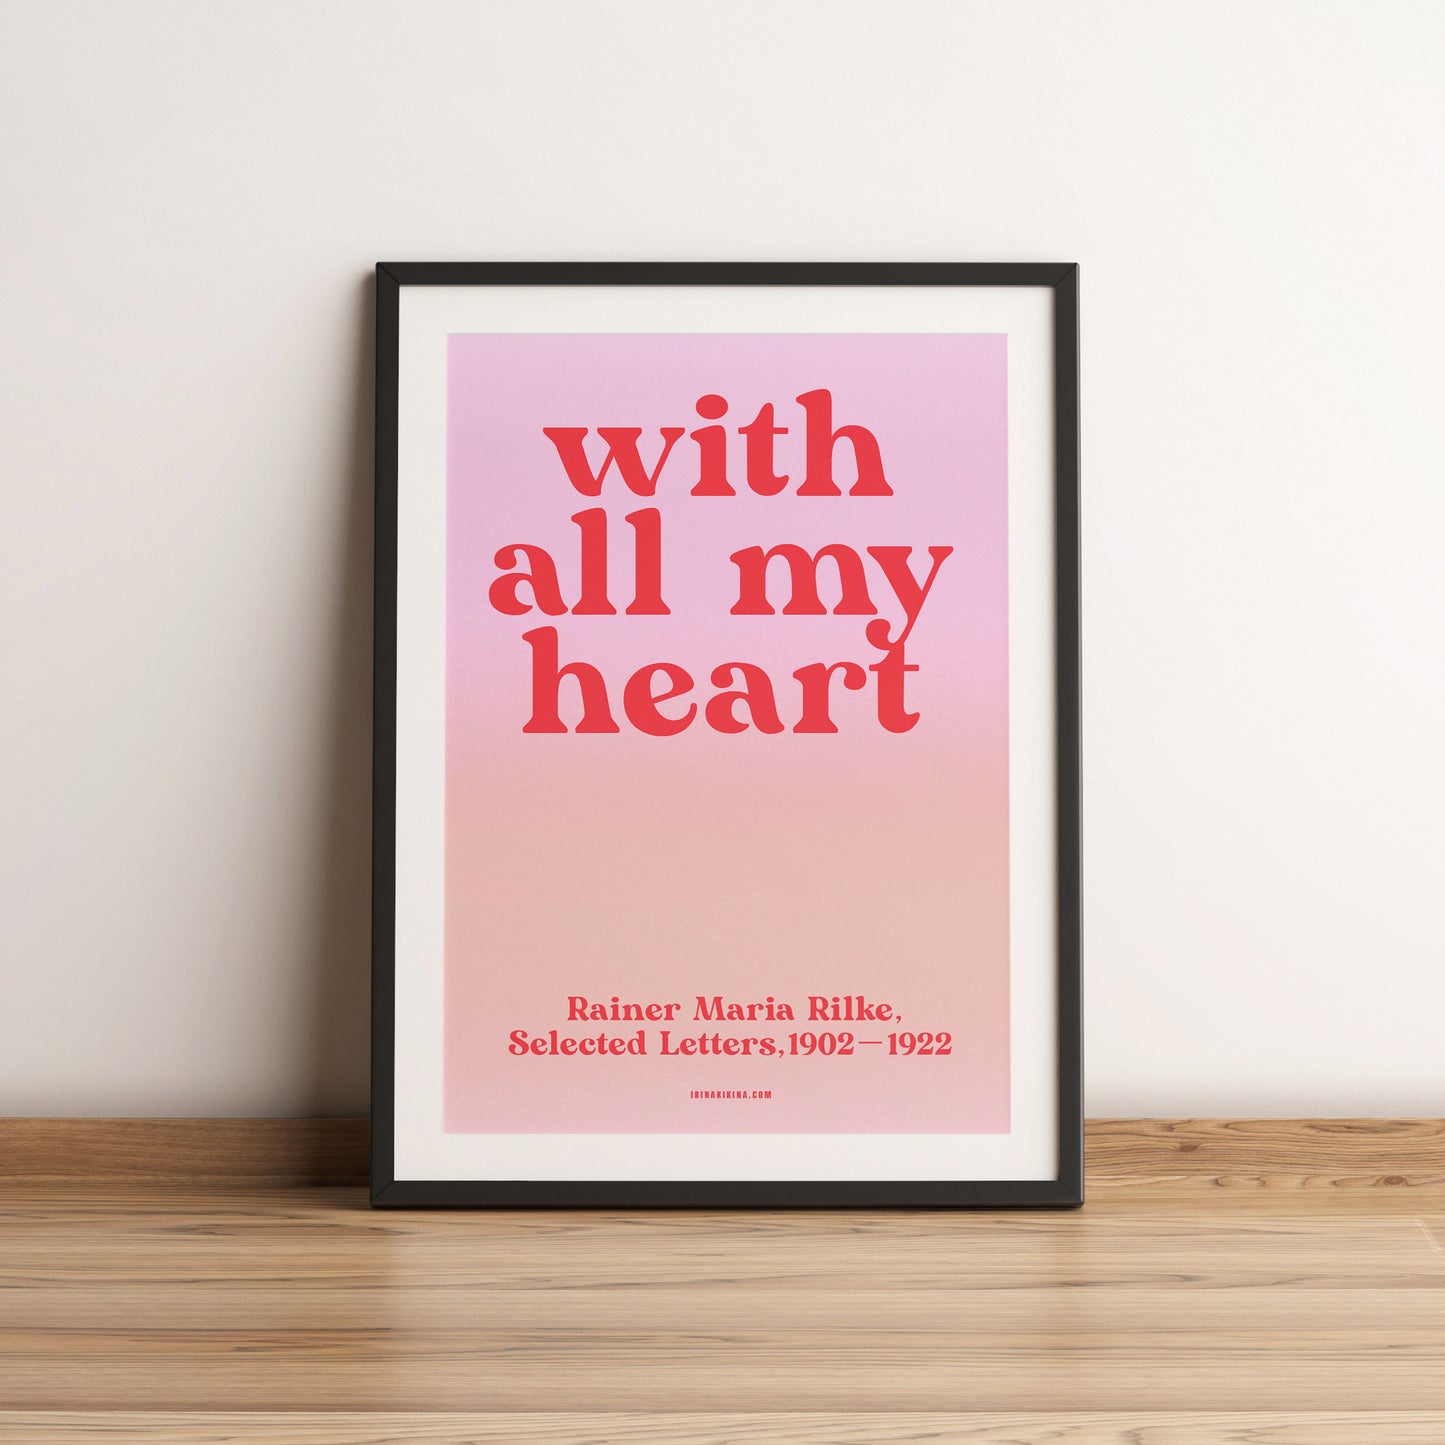 With All my Love. Rilke Letter Quote Artwork. Poster.